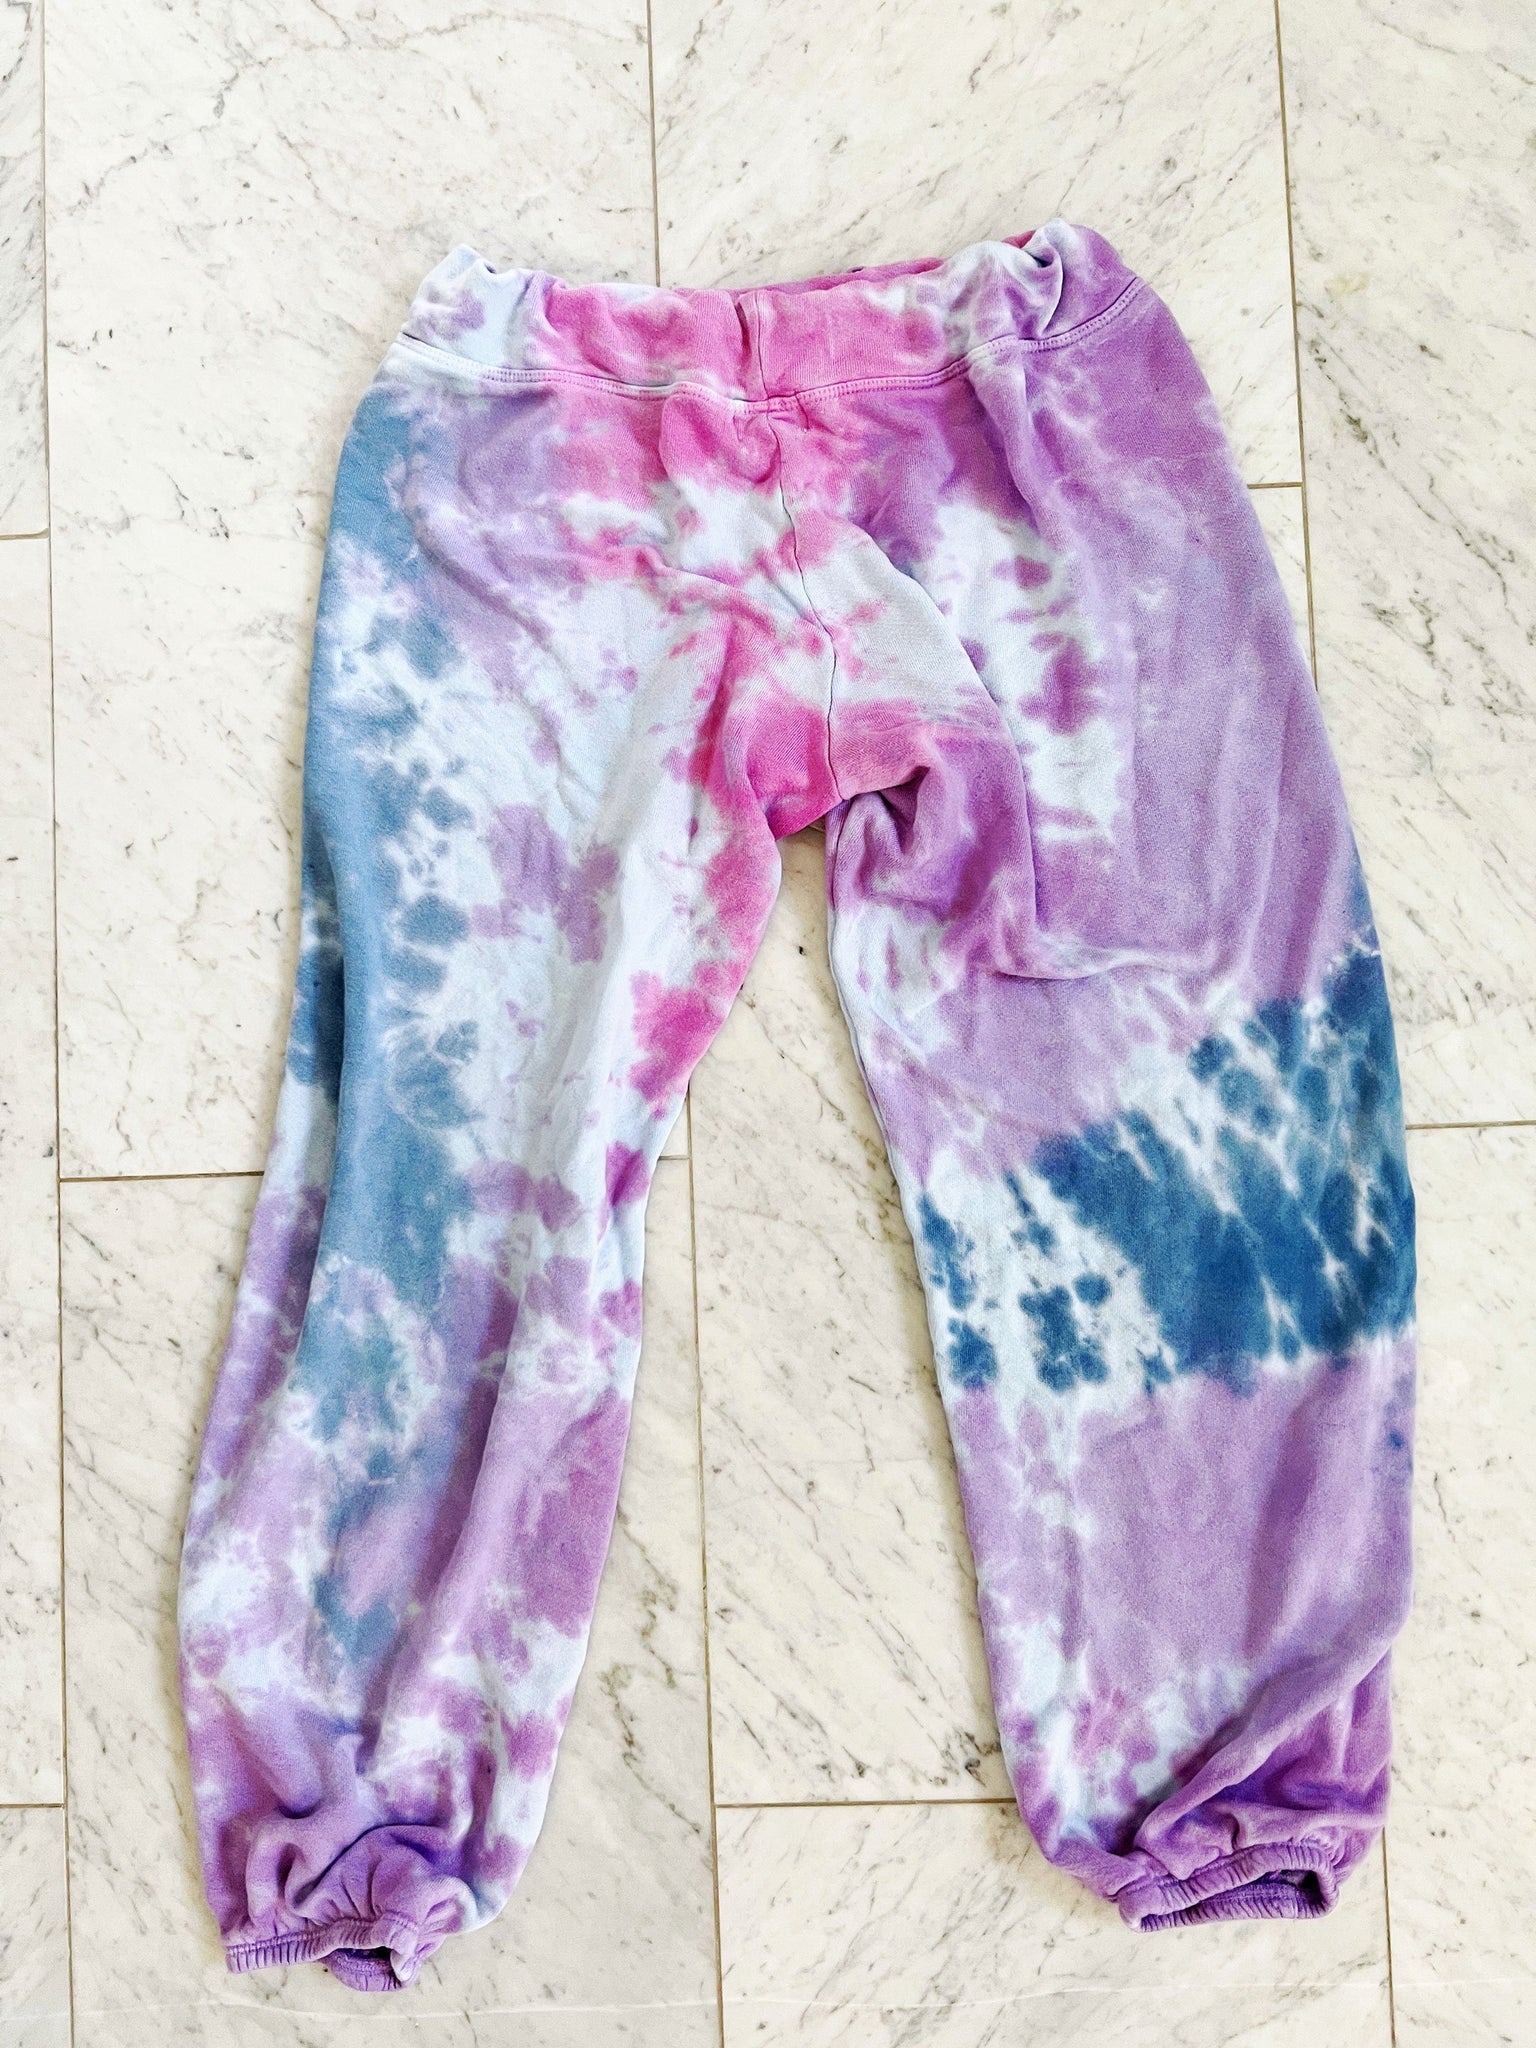 Hand dyed one of a kind ultra soft sweatpants in purples, pinks and blues